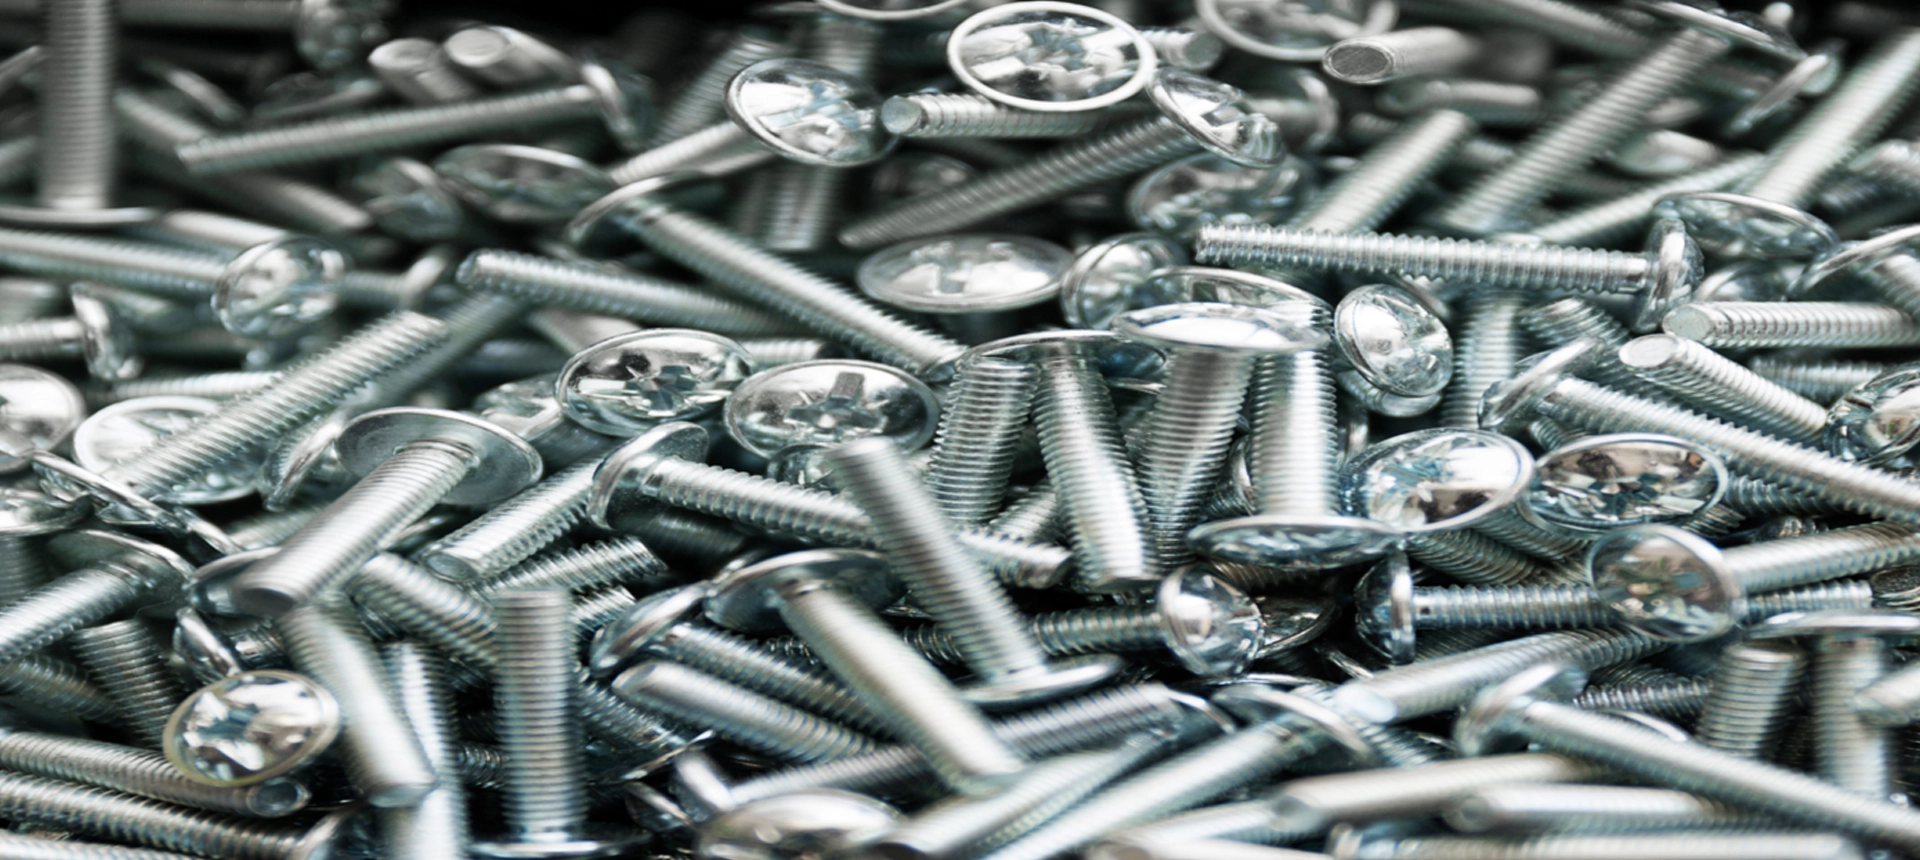 Materials and Manufacturing Process of Screws